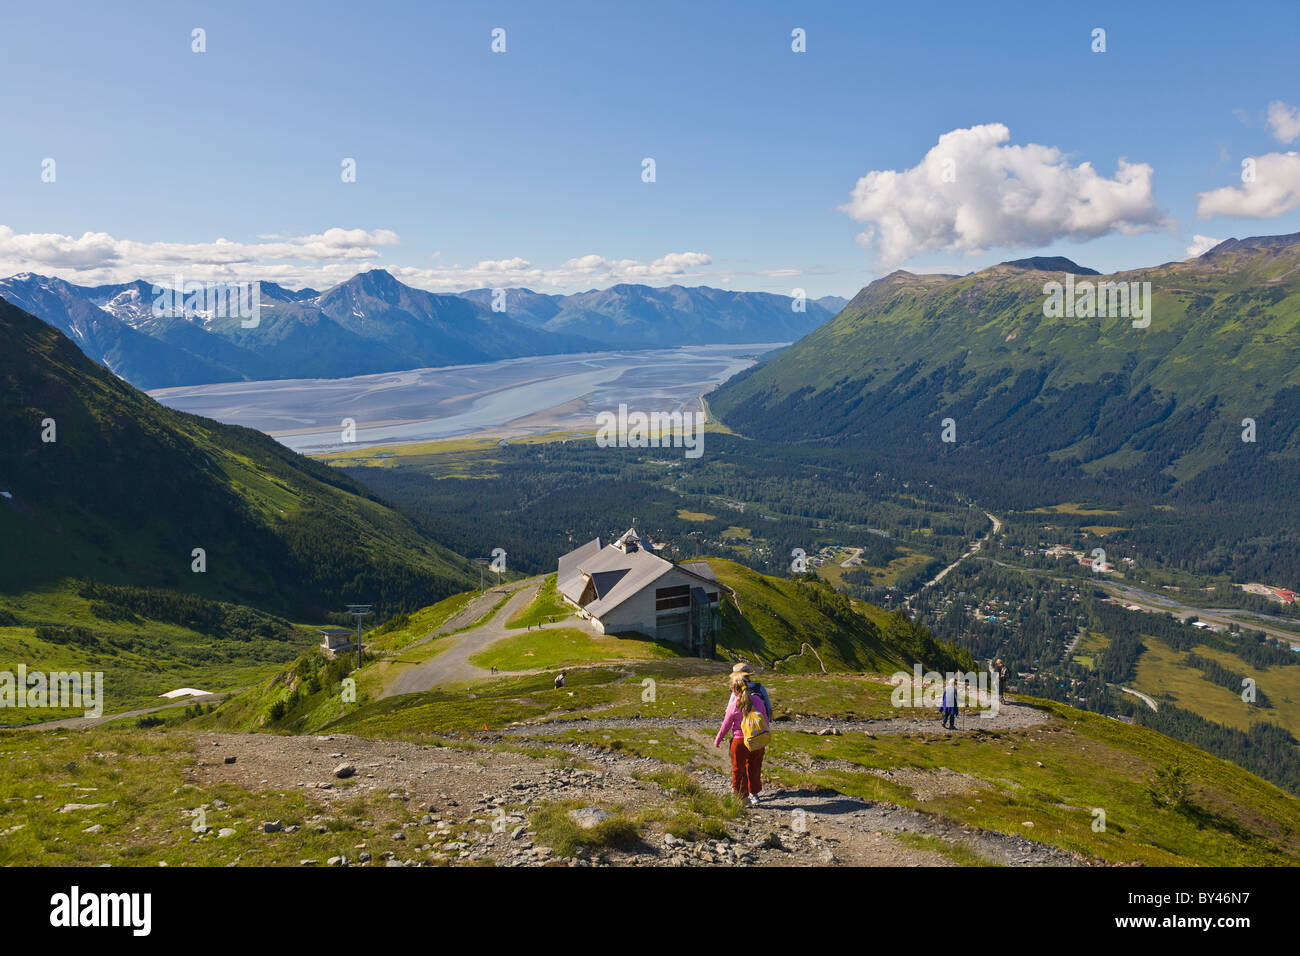 People hiking at the Alyeska Ski Resort in the Chugach Mountains in Girdwood Alaskawith Turnagin Arm in the distance Stock Photo